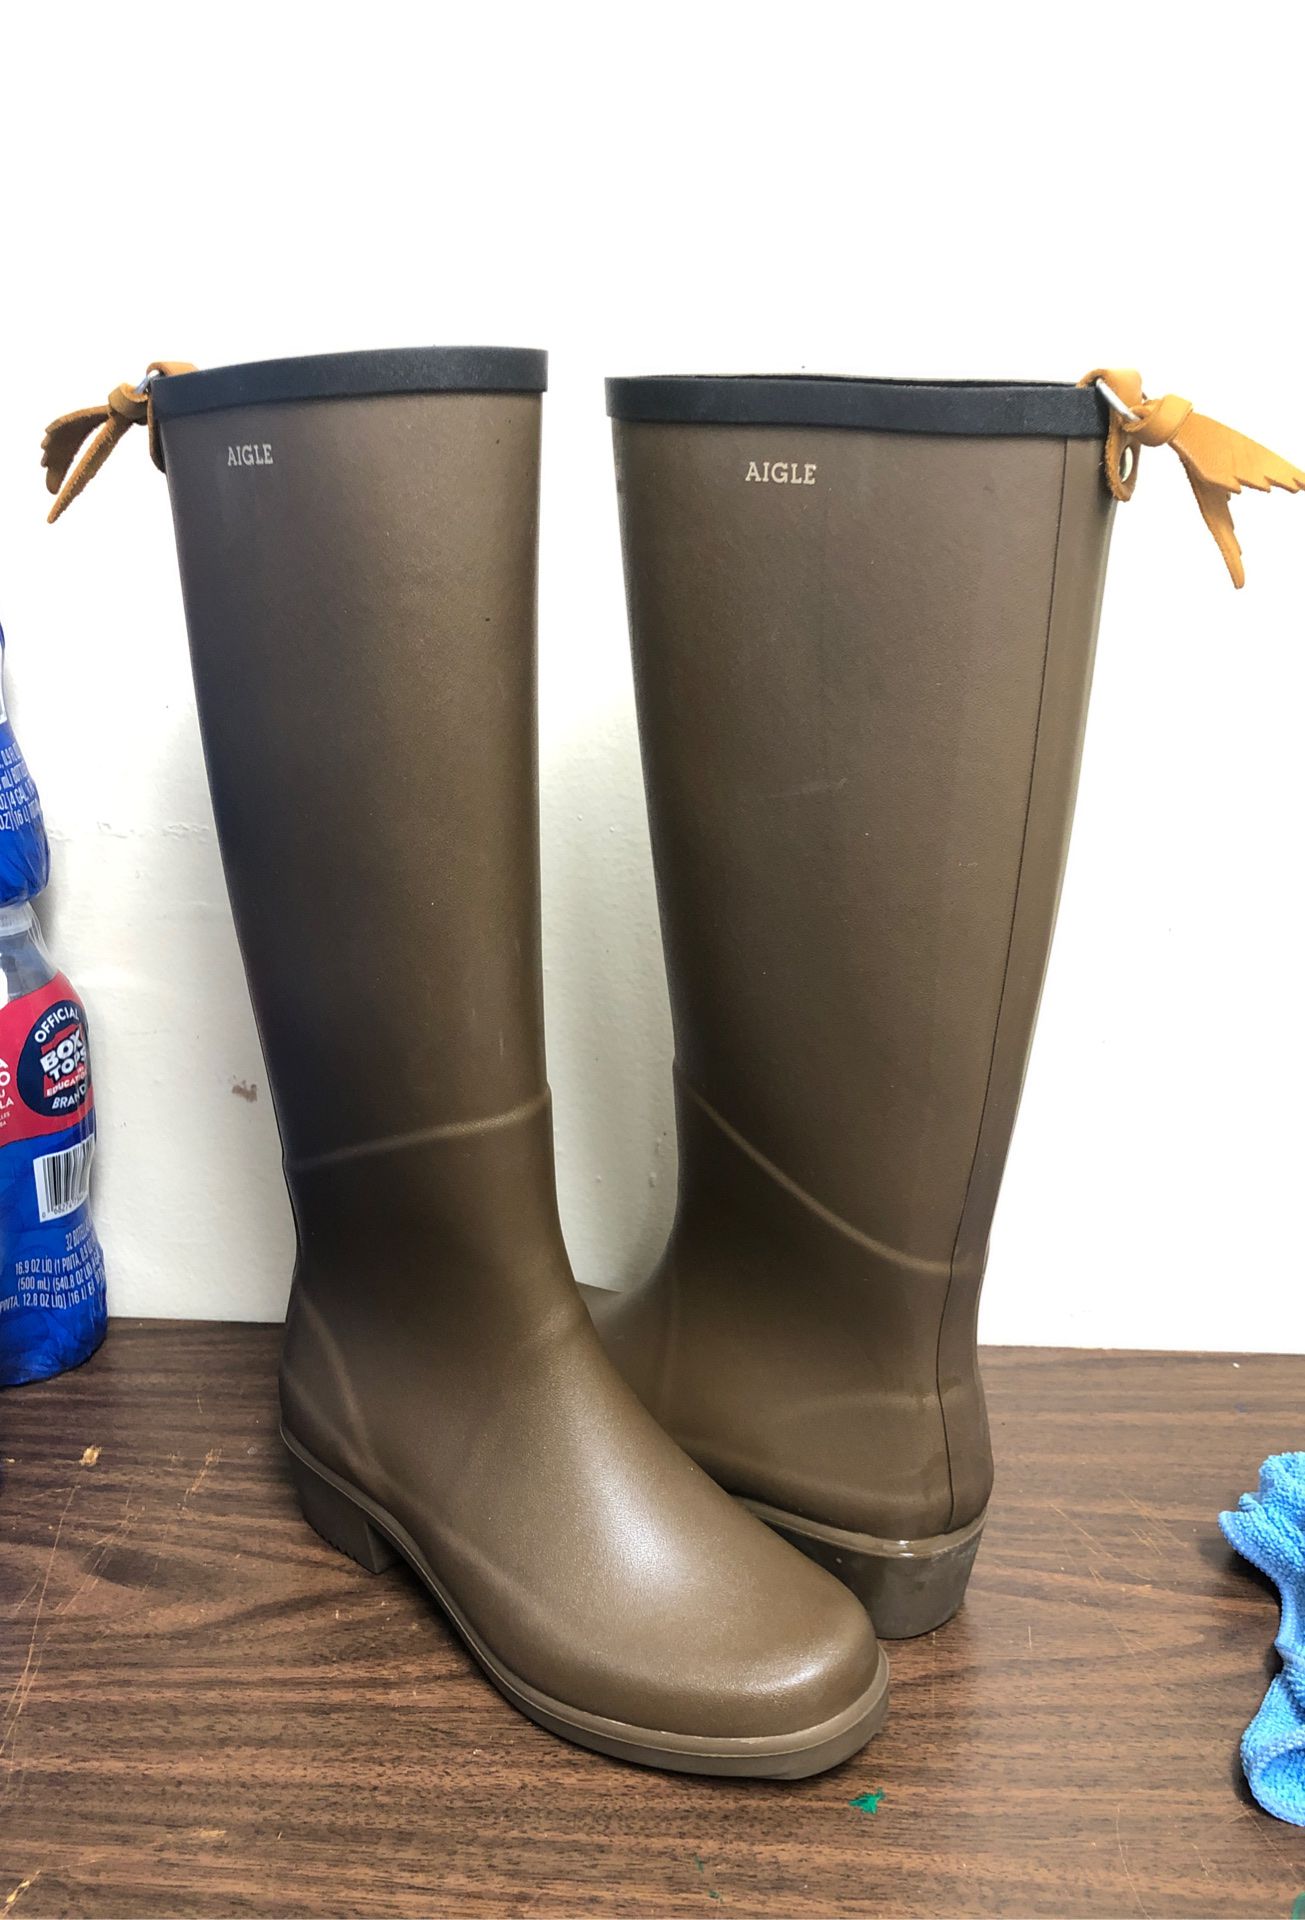 AIGLE rubber boots made in France size 6